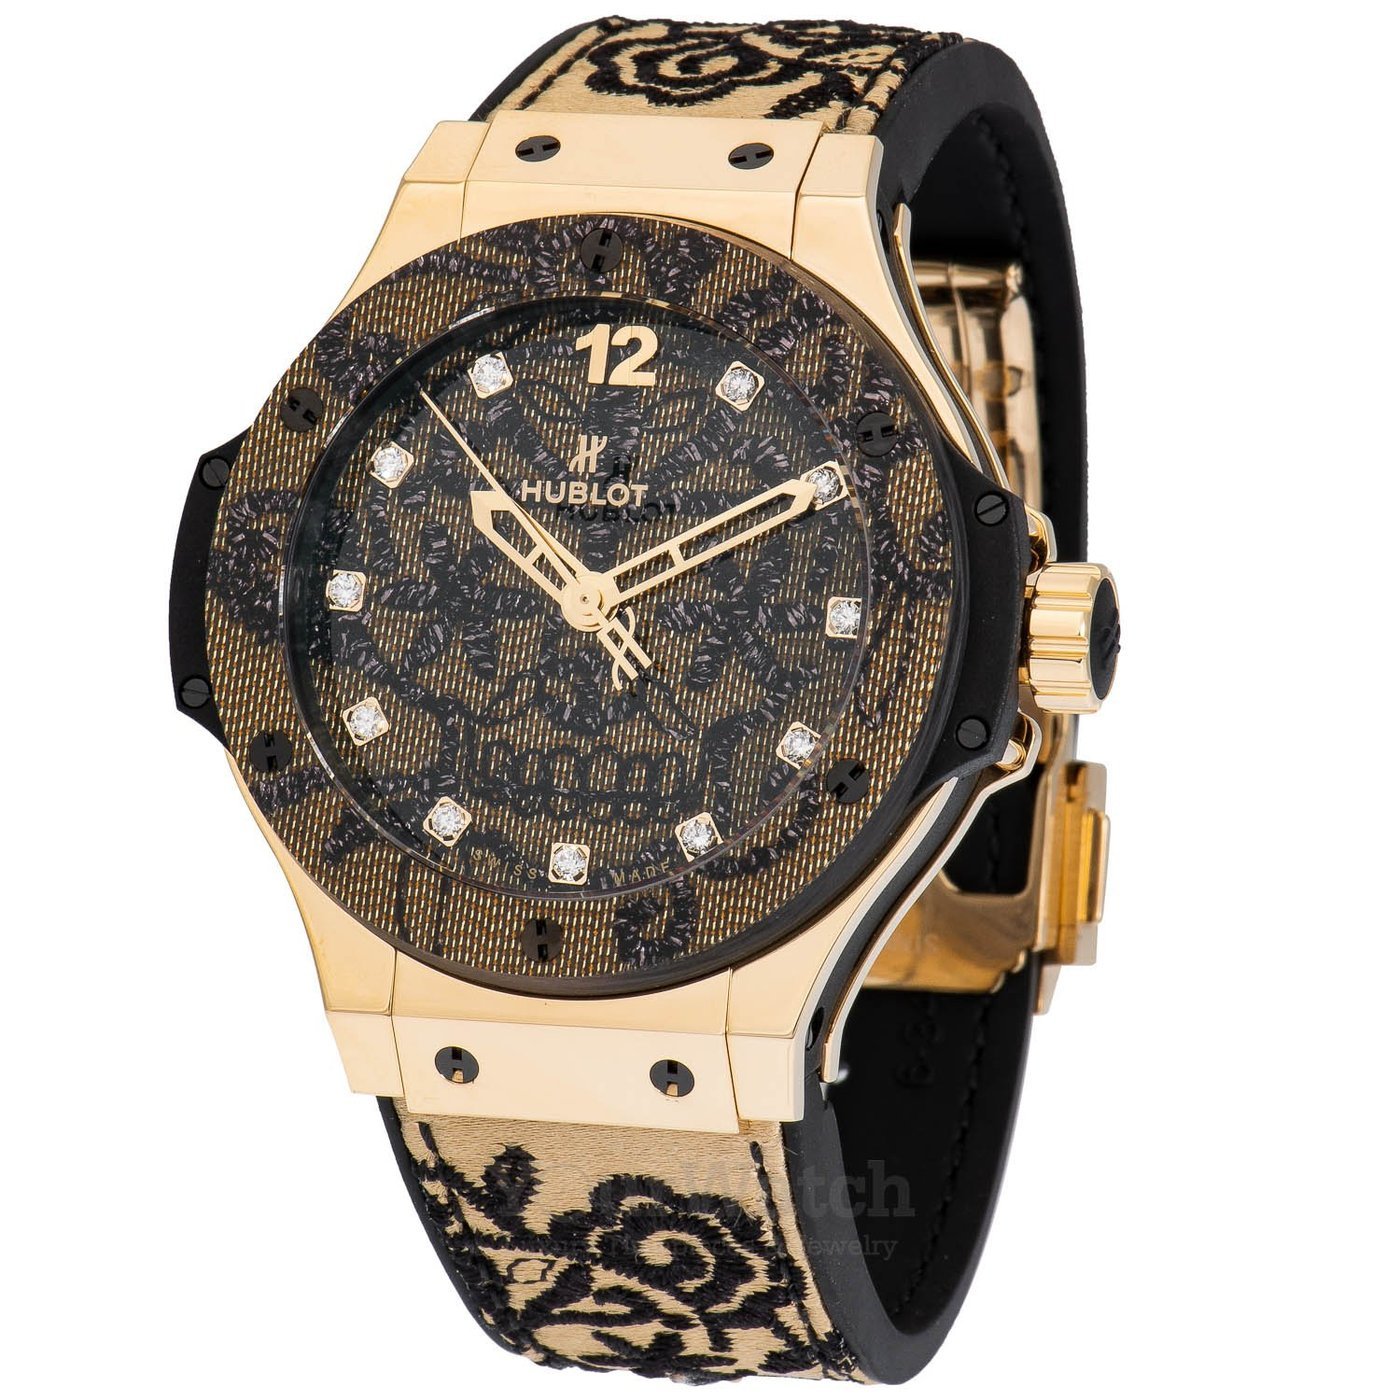 Hublot-Big-Bang-Broderie-Yellow-Gold-and-Diamond-Ladies-Watch-343.VX.6580.NR.BSK16-Yourwatch